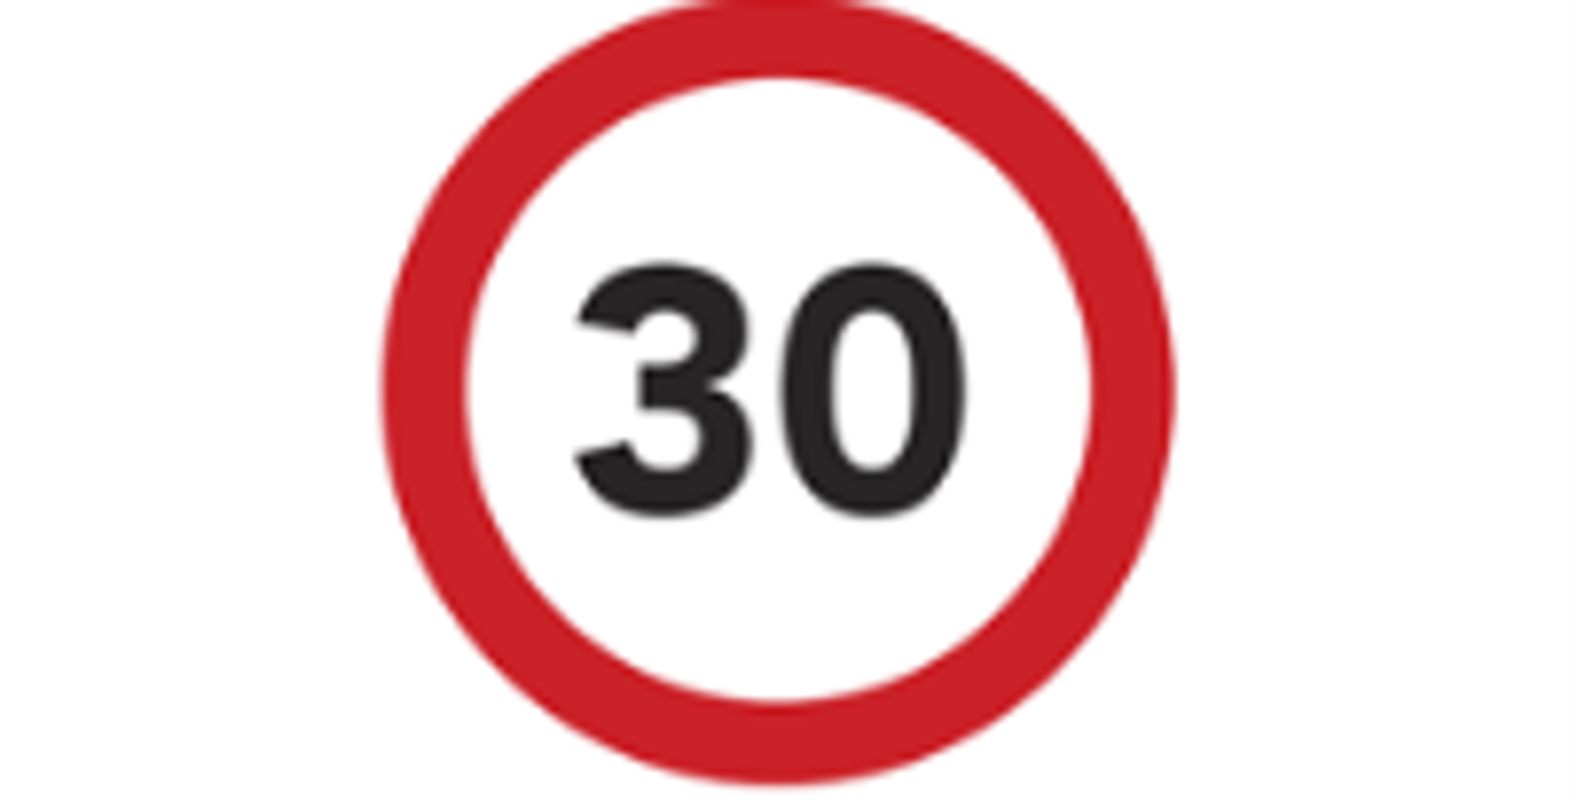 Amsterdam drives down the pedal: Citywide 30 km/h speed limit takes effect